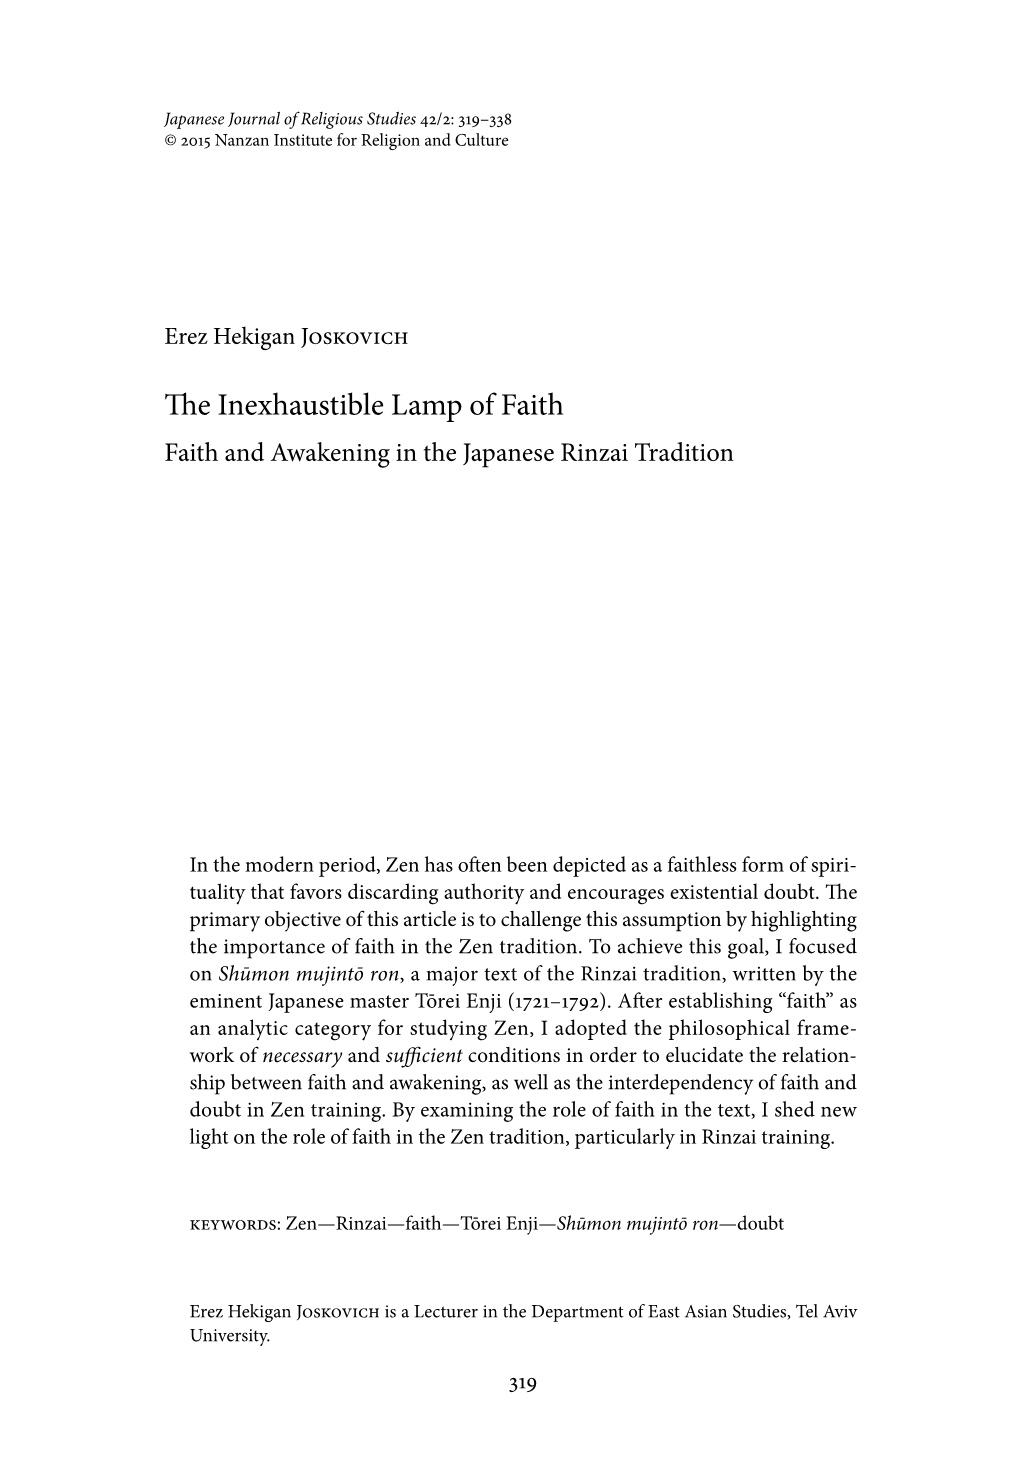 The Inexhaustible Lamp of Faith Faith and Awakening in the Japanese Rinzai Tradition